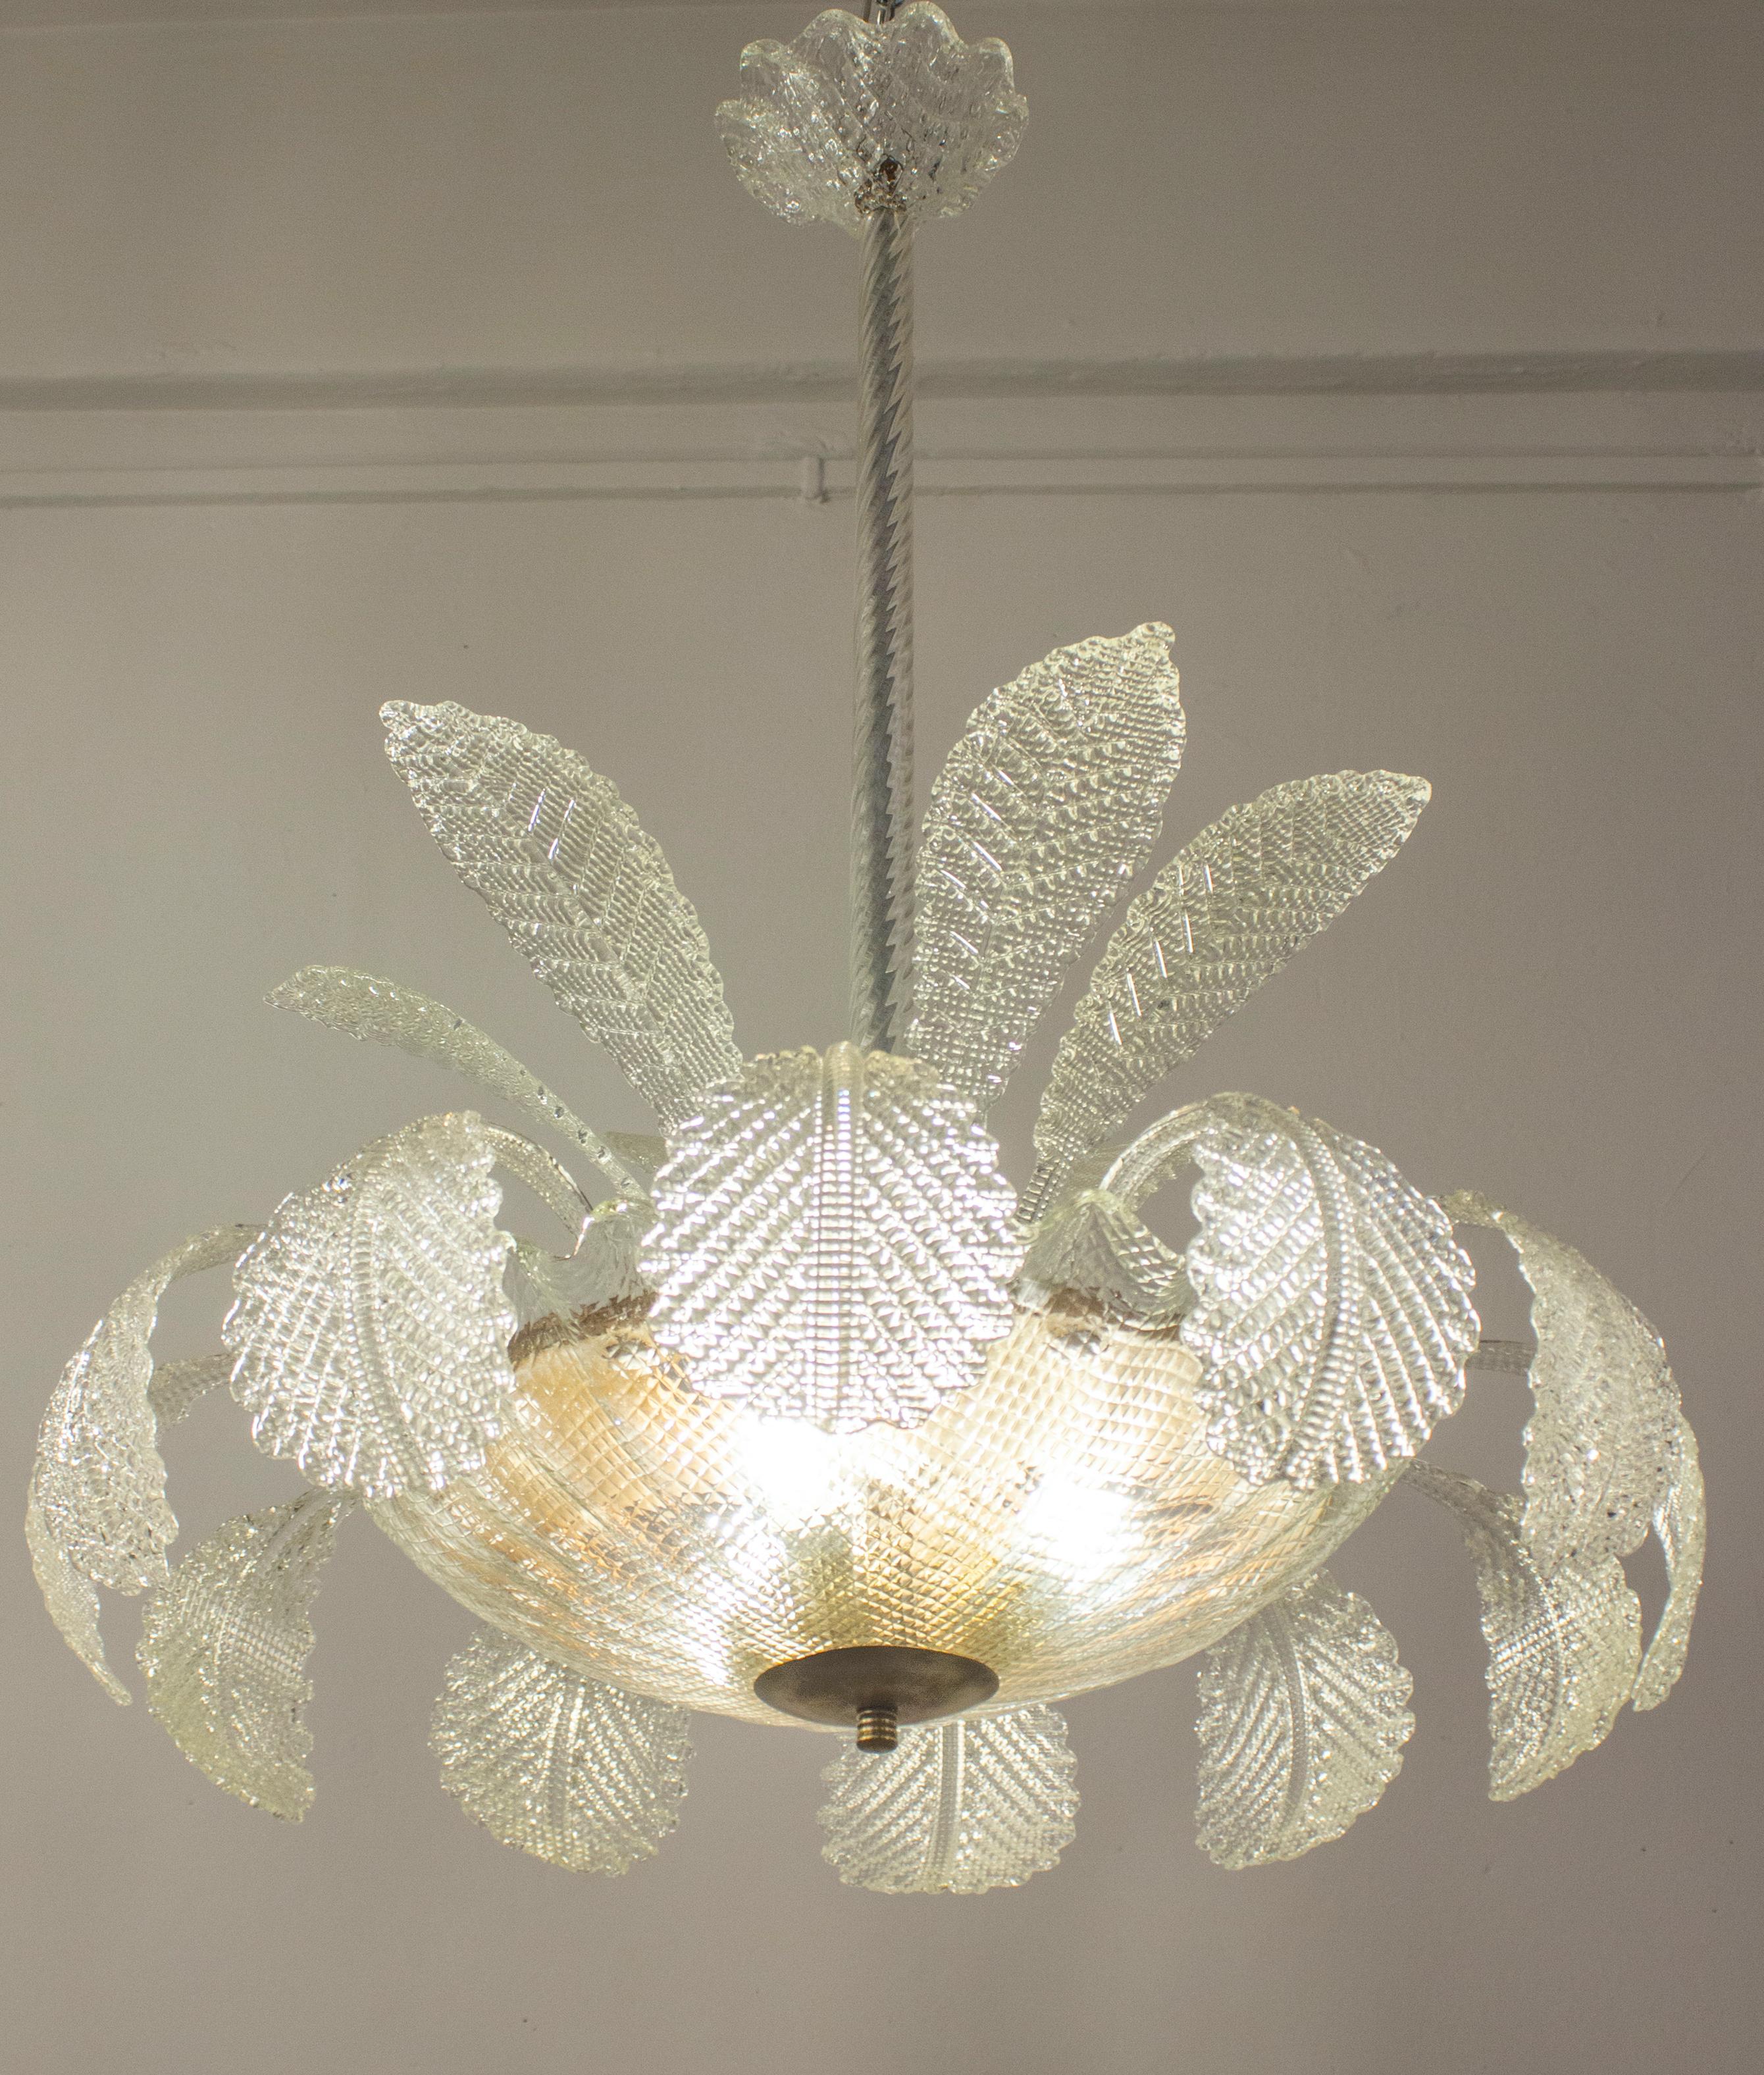 Charming hand blown Murano glass chandelier by Ercole Barovier.
Excellent vintage condition.
Three E 27 light bulbs.
Cleaned and re-wired, in full working order and ready to use. In excellent vintage condition. The leaves, all original and in good